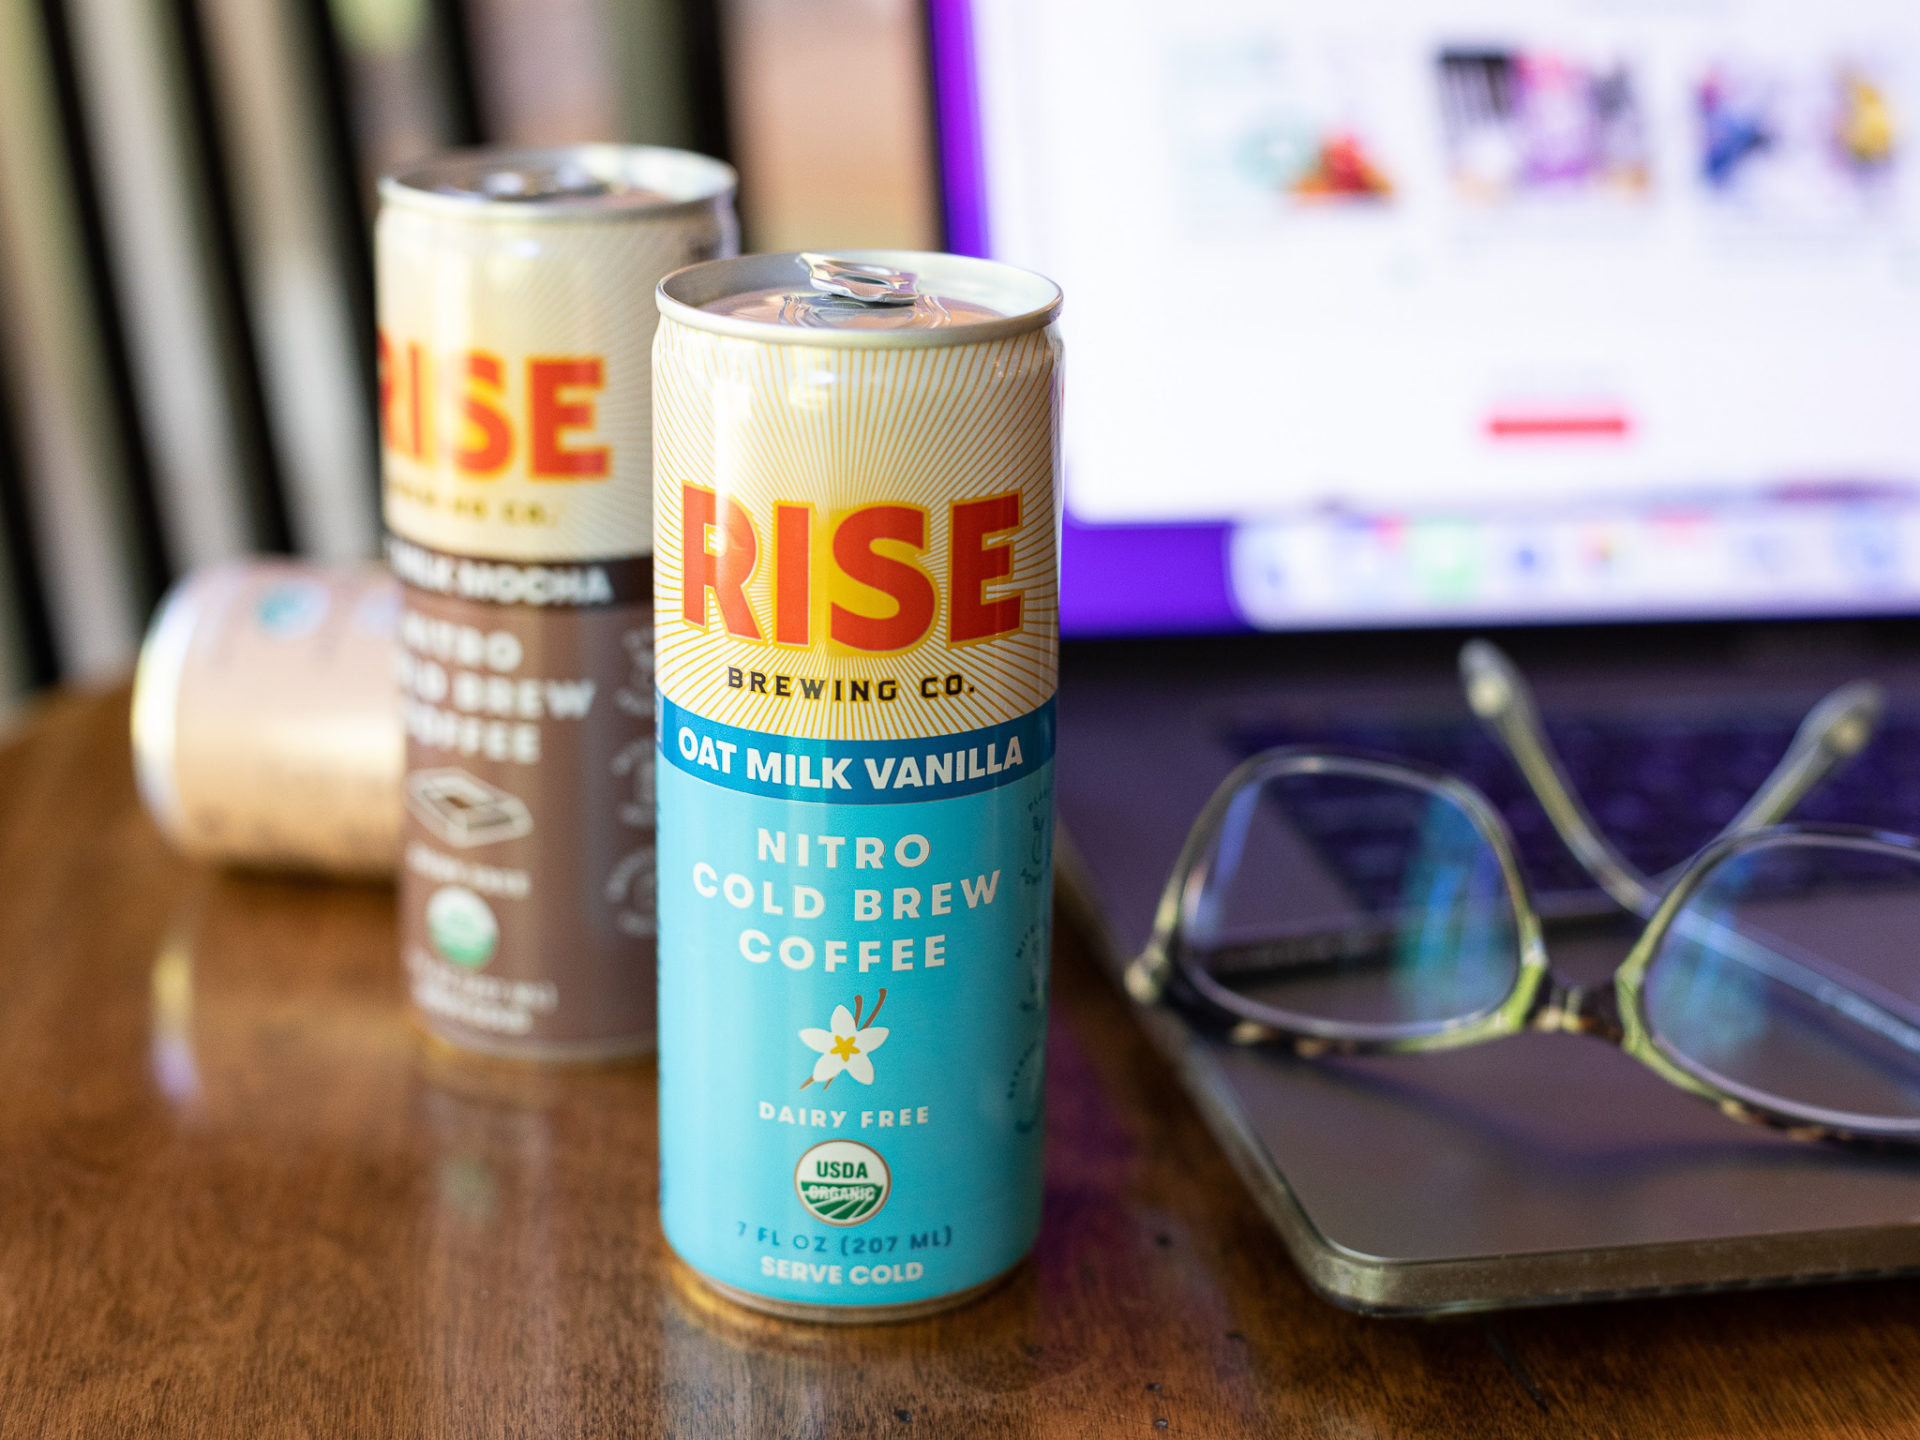 Rise Nitro Cold Brew Coffee As Low As FREE At Kroger